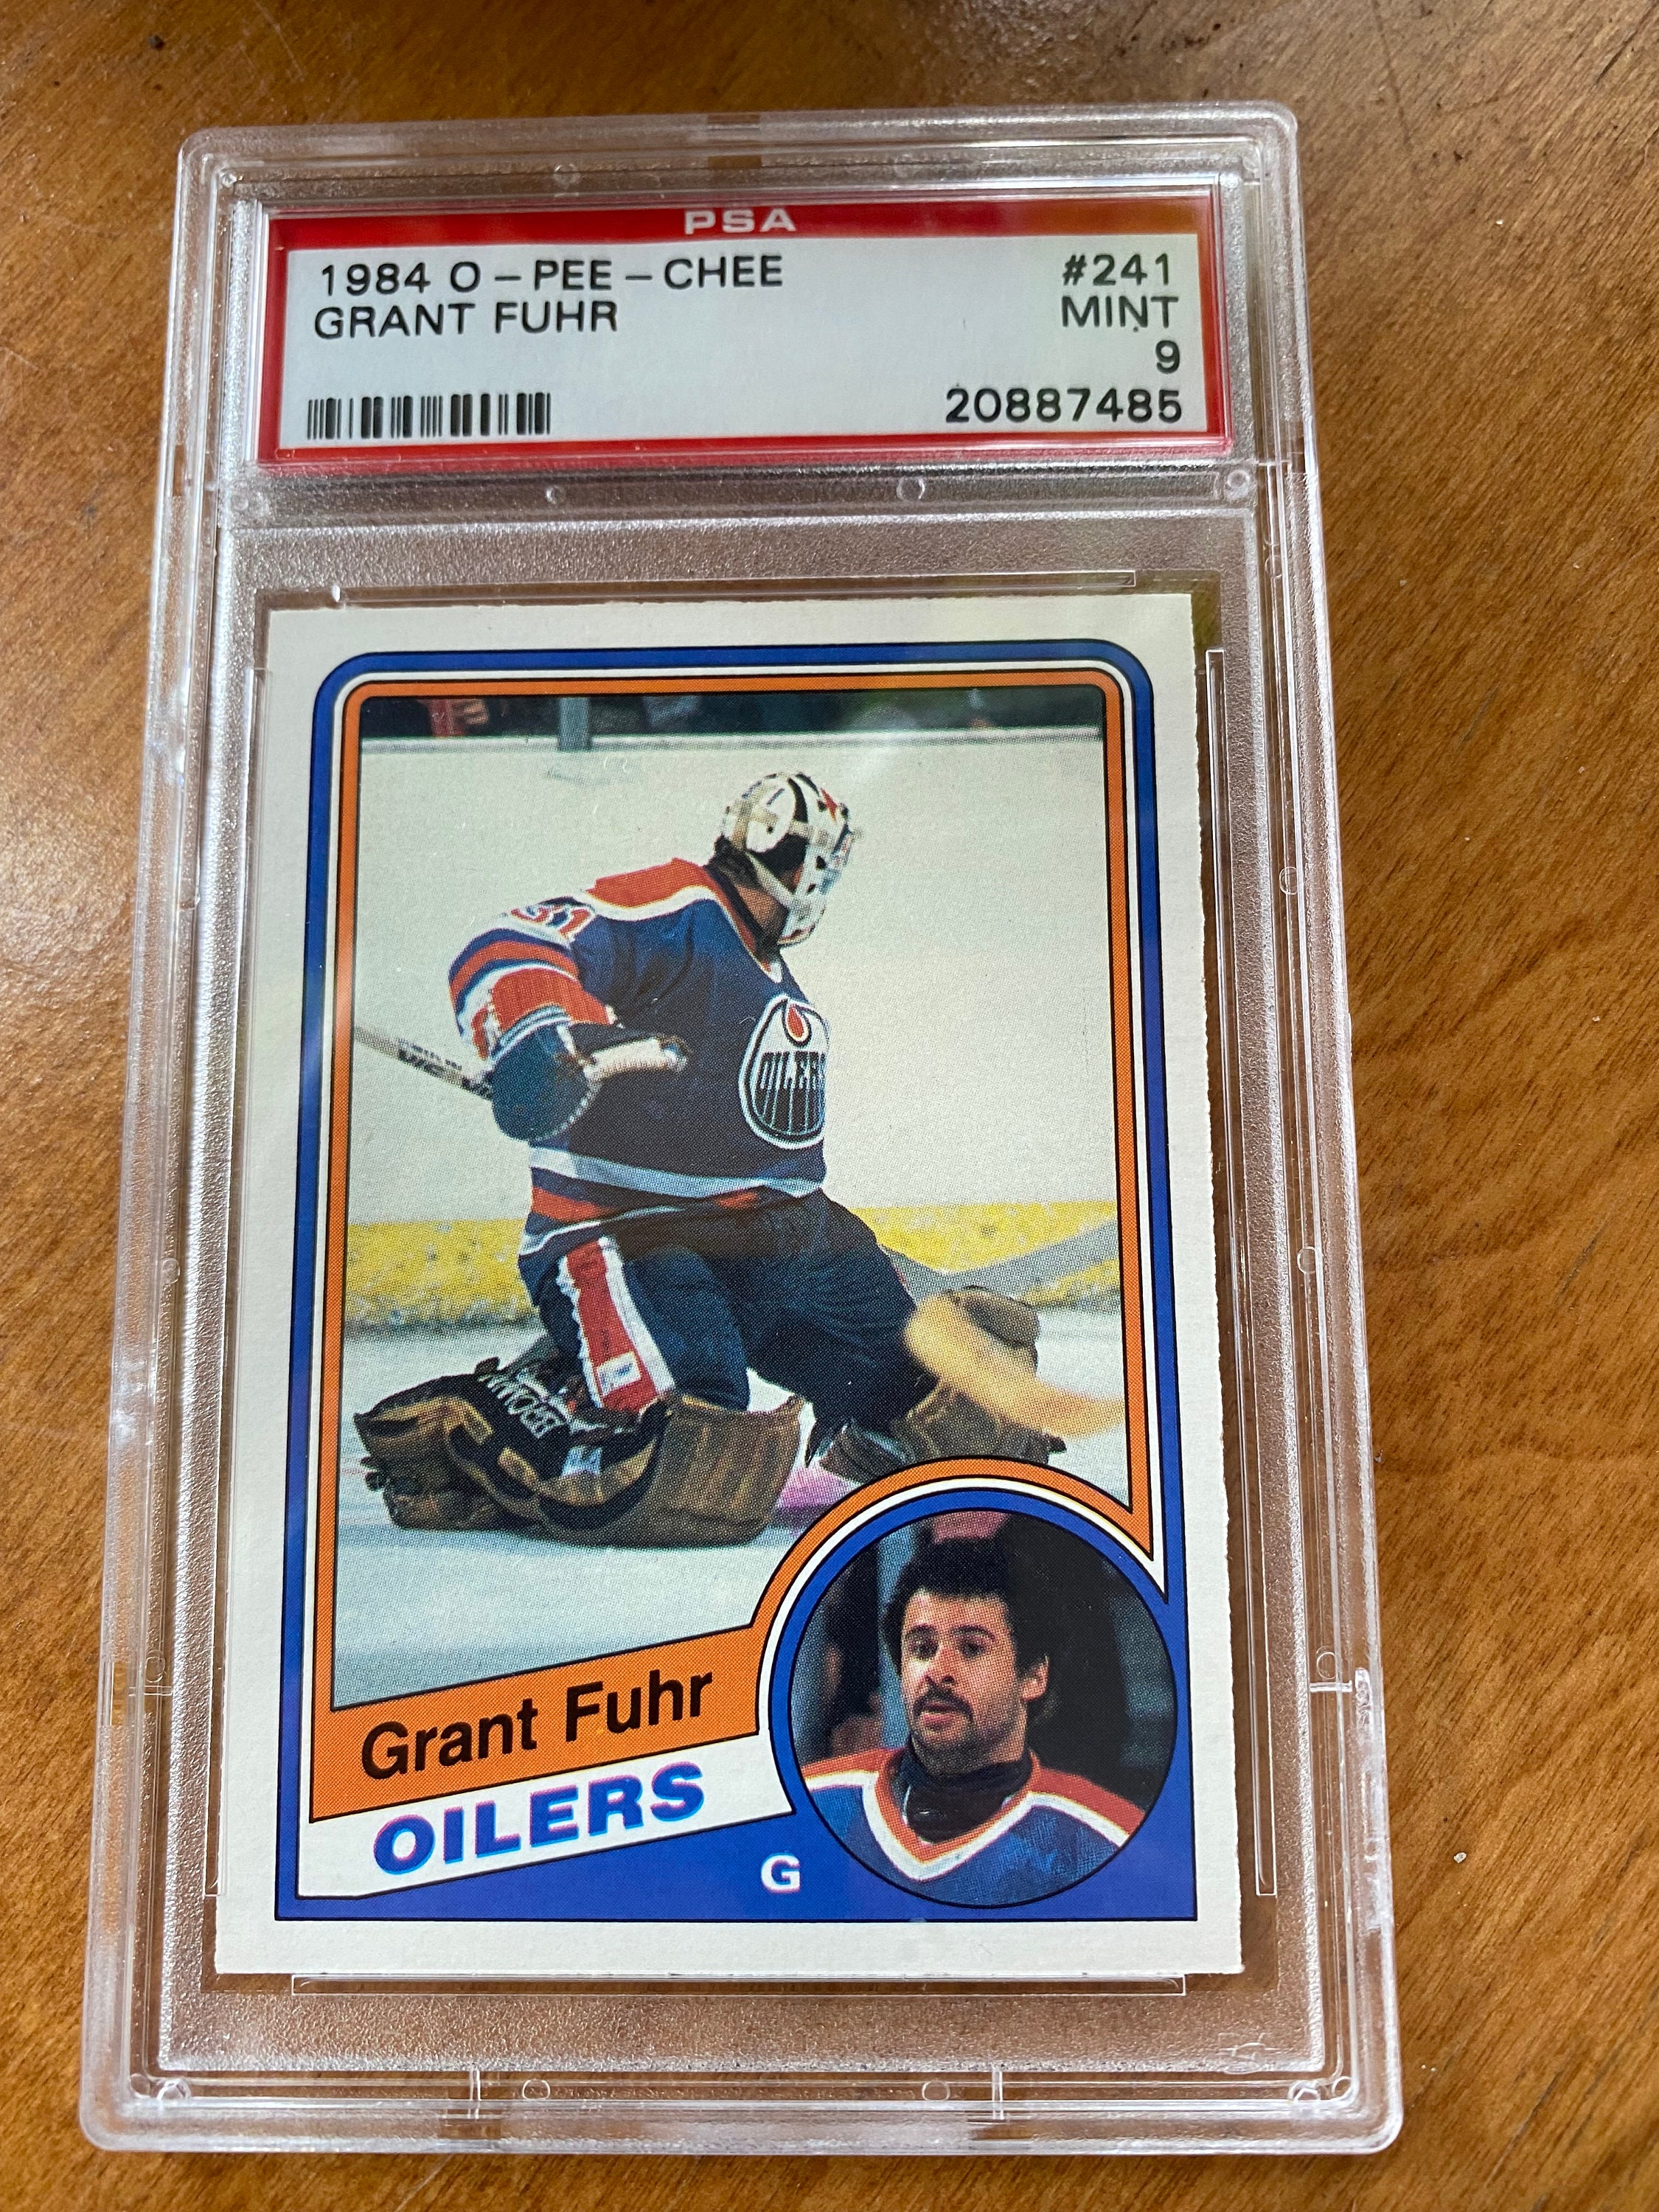 Grant Fuhr Trading Cards: Values, Tracking & Hot Deals